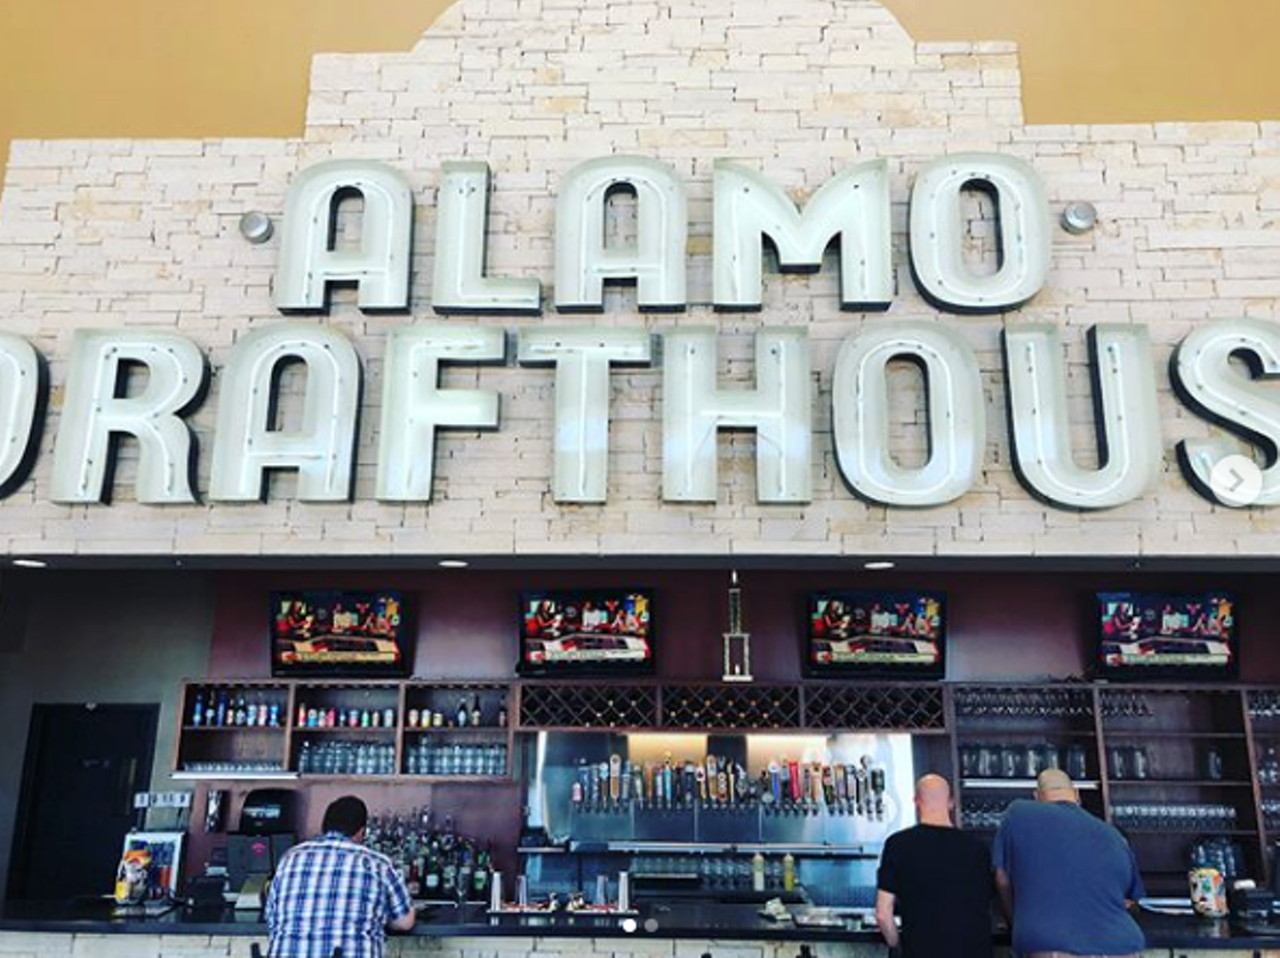 Alamo Drafthouse
Multiple locations, drafthouse.com
Okay, so it’s not free food, but Alamo Drafthouse does offer a free movie ticket in honor of your birthday. How cool is that?!
Photo via Instagram / carplex_cinemas